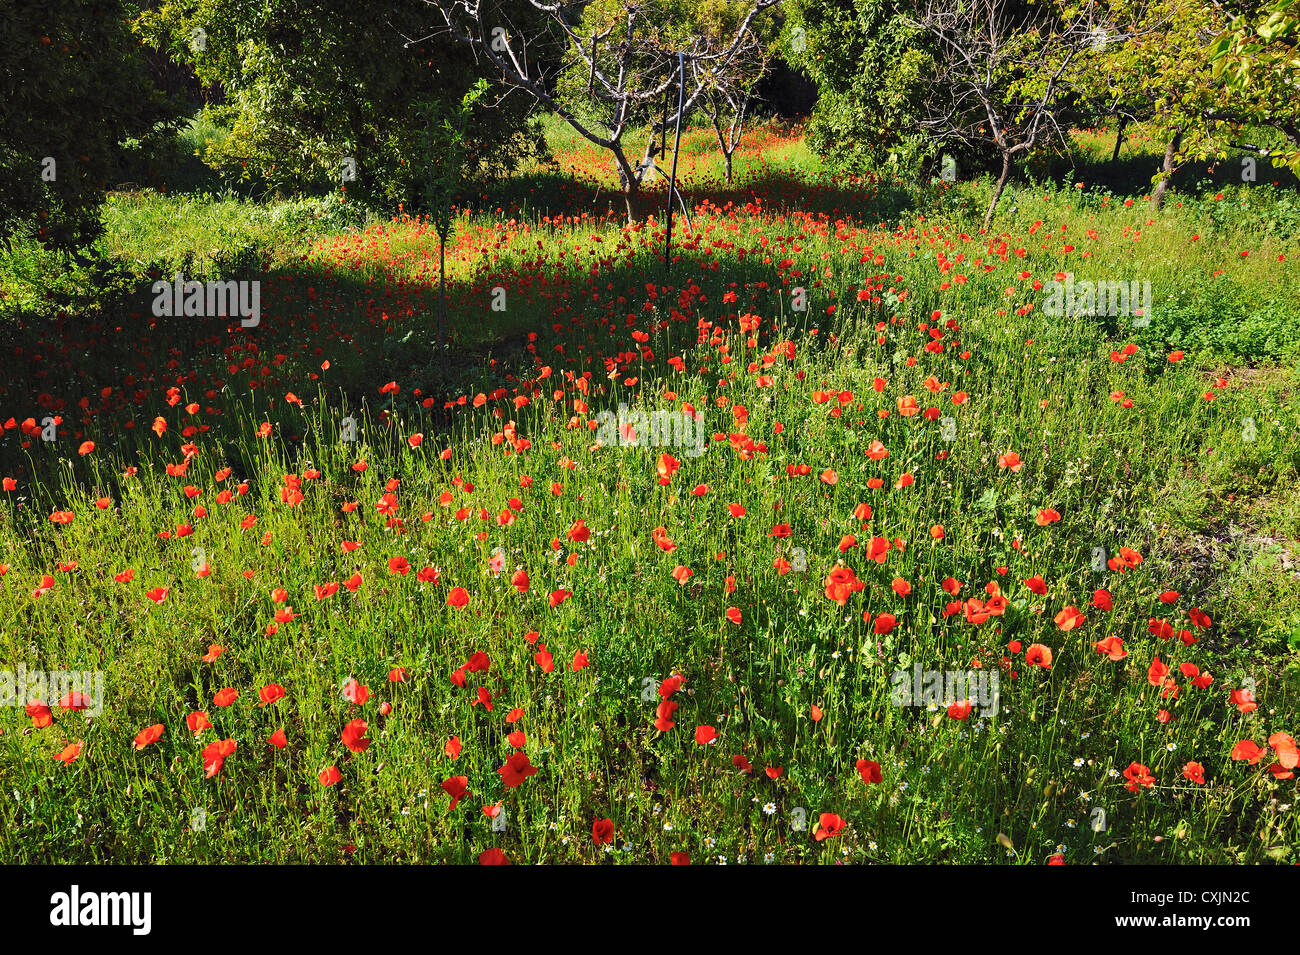 Sea of red field-poppies and other wildflowers in an orange orchard in the Solea Valley, Troodos, Cyprus Stock Photo